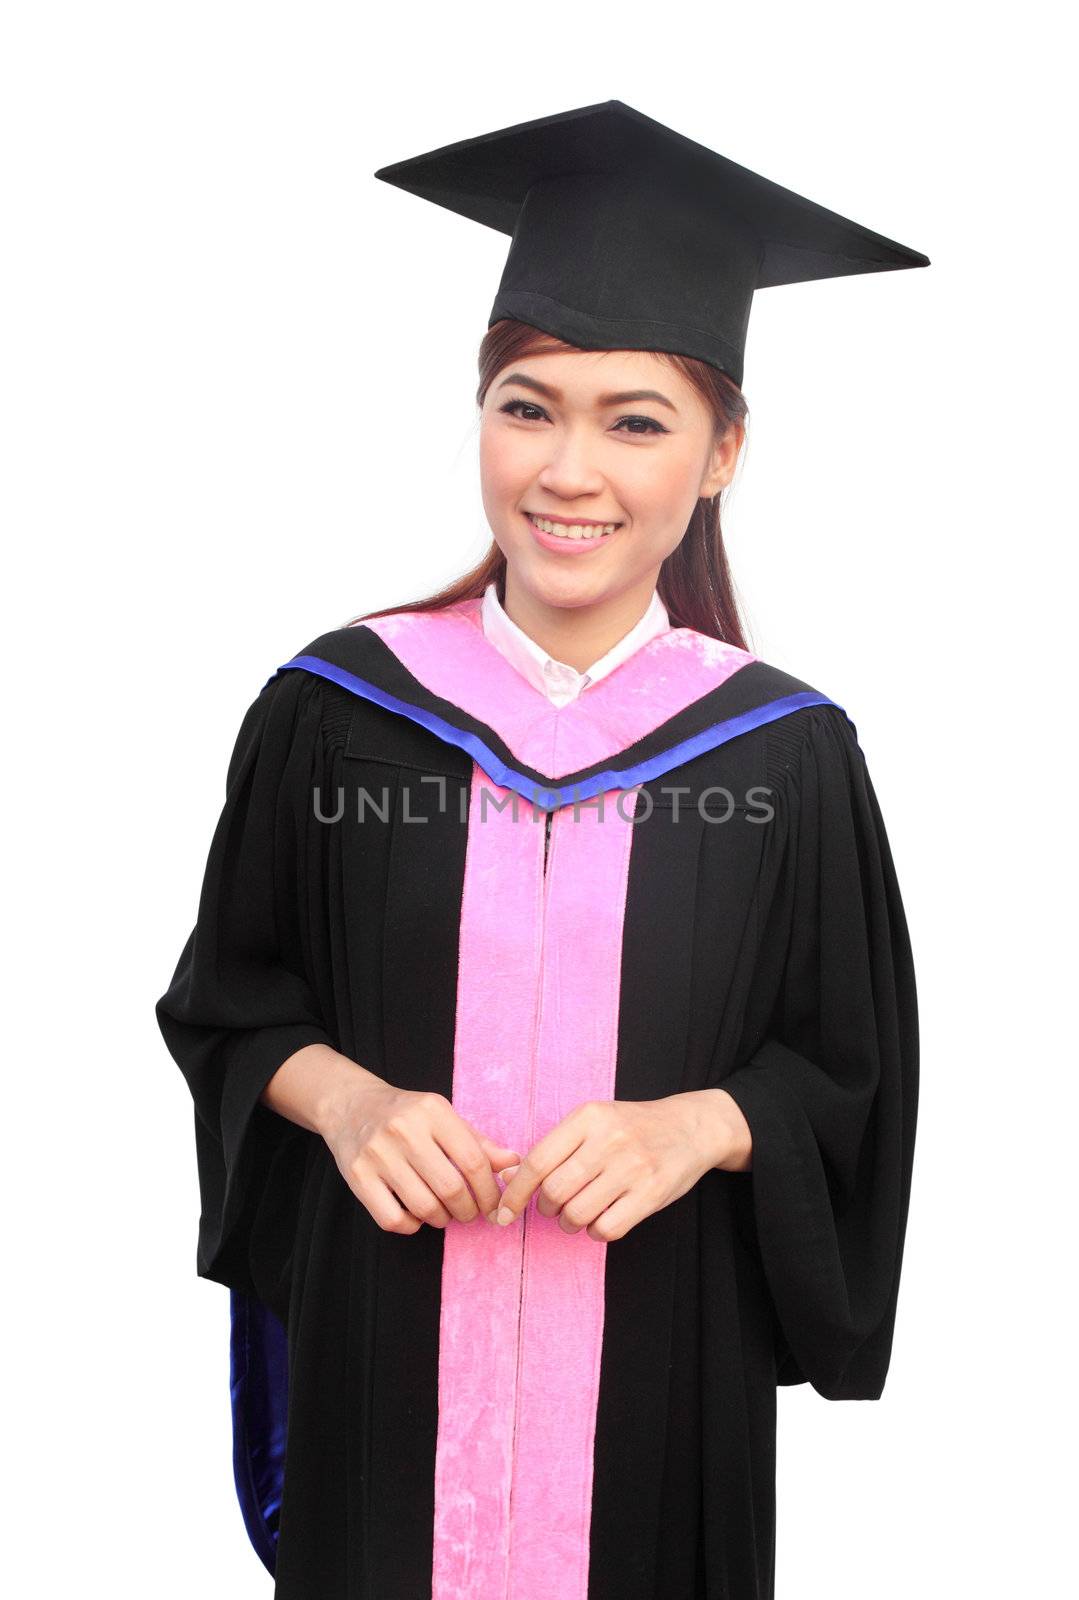 woman with graduation cap and gown on white background